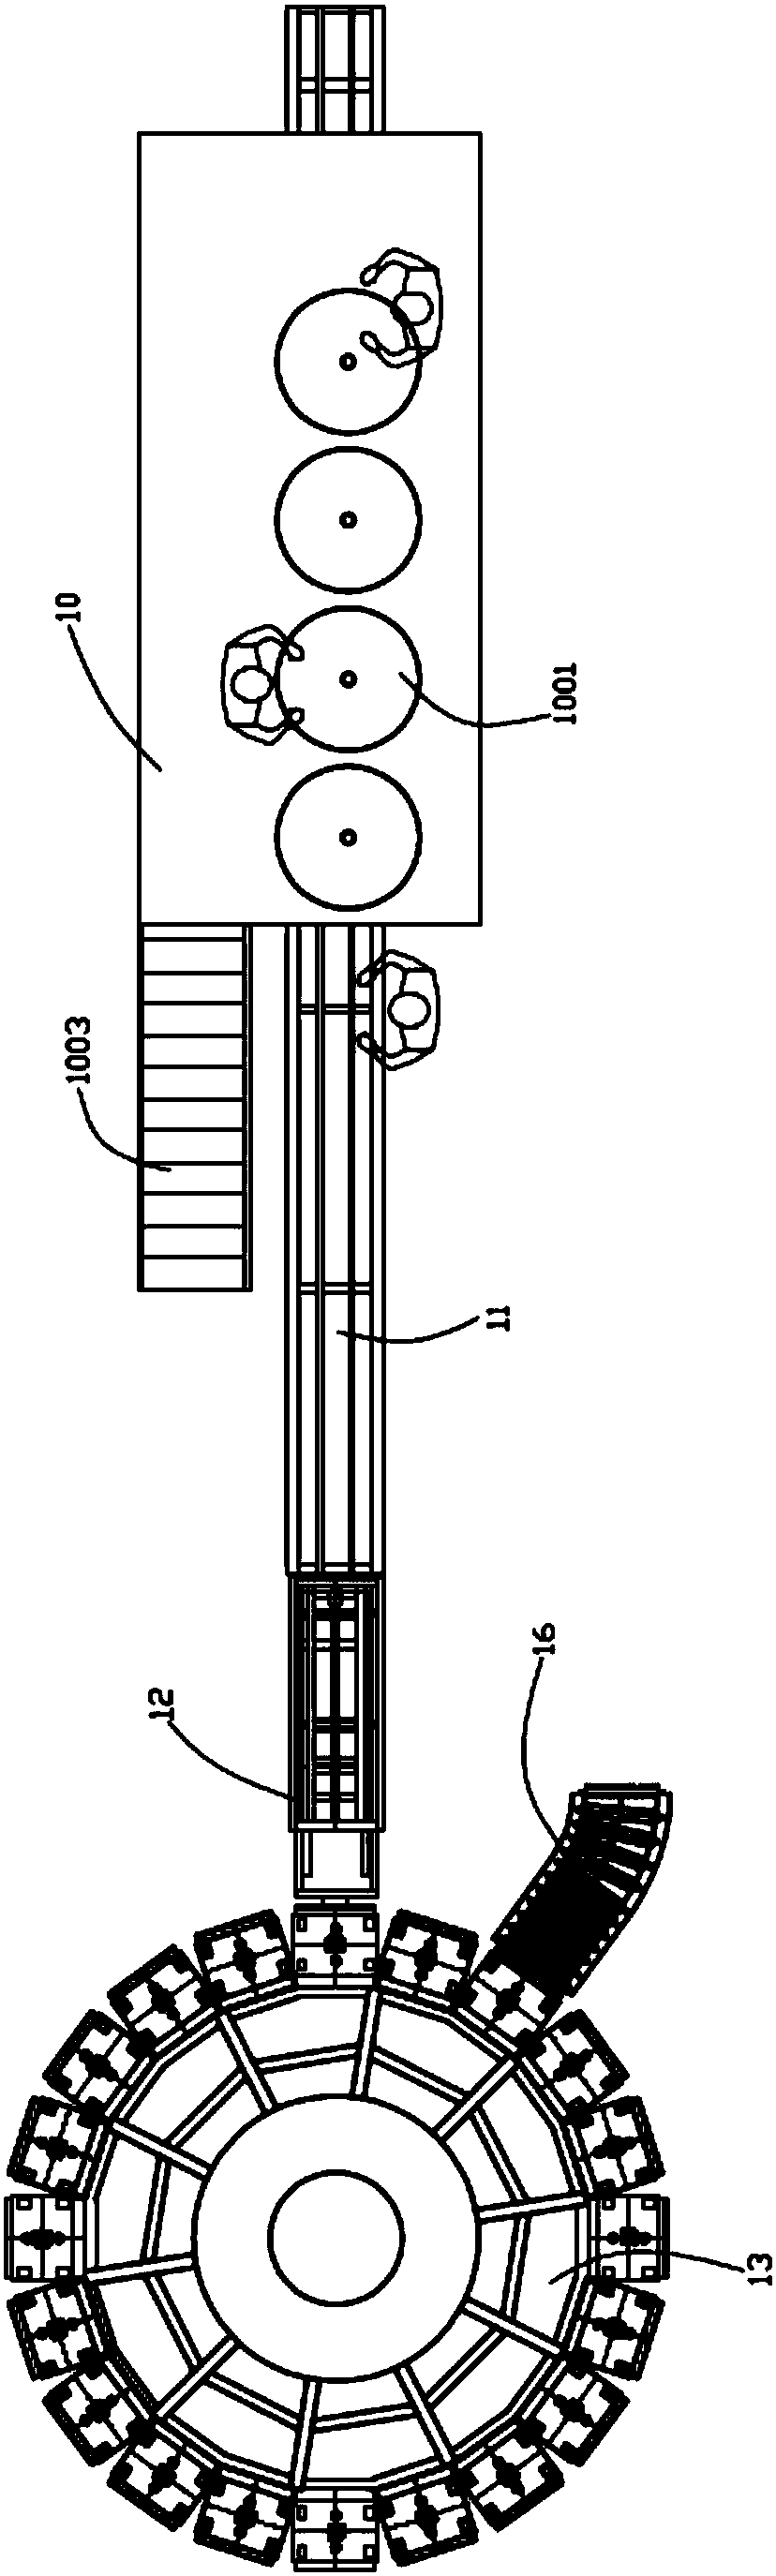 Automatic-pressing production equipment for bittern bean curd and pressing method